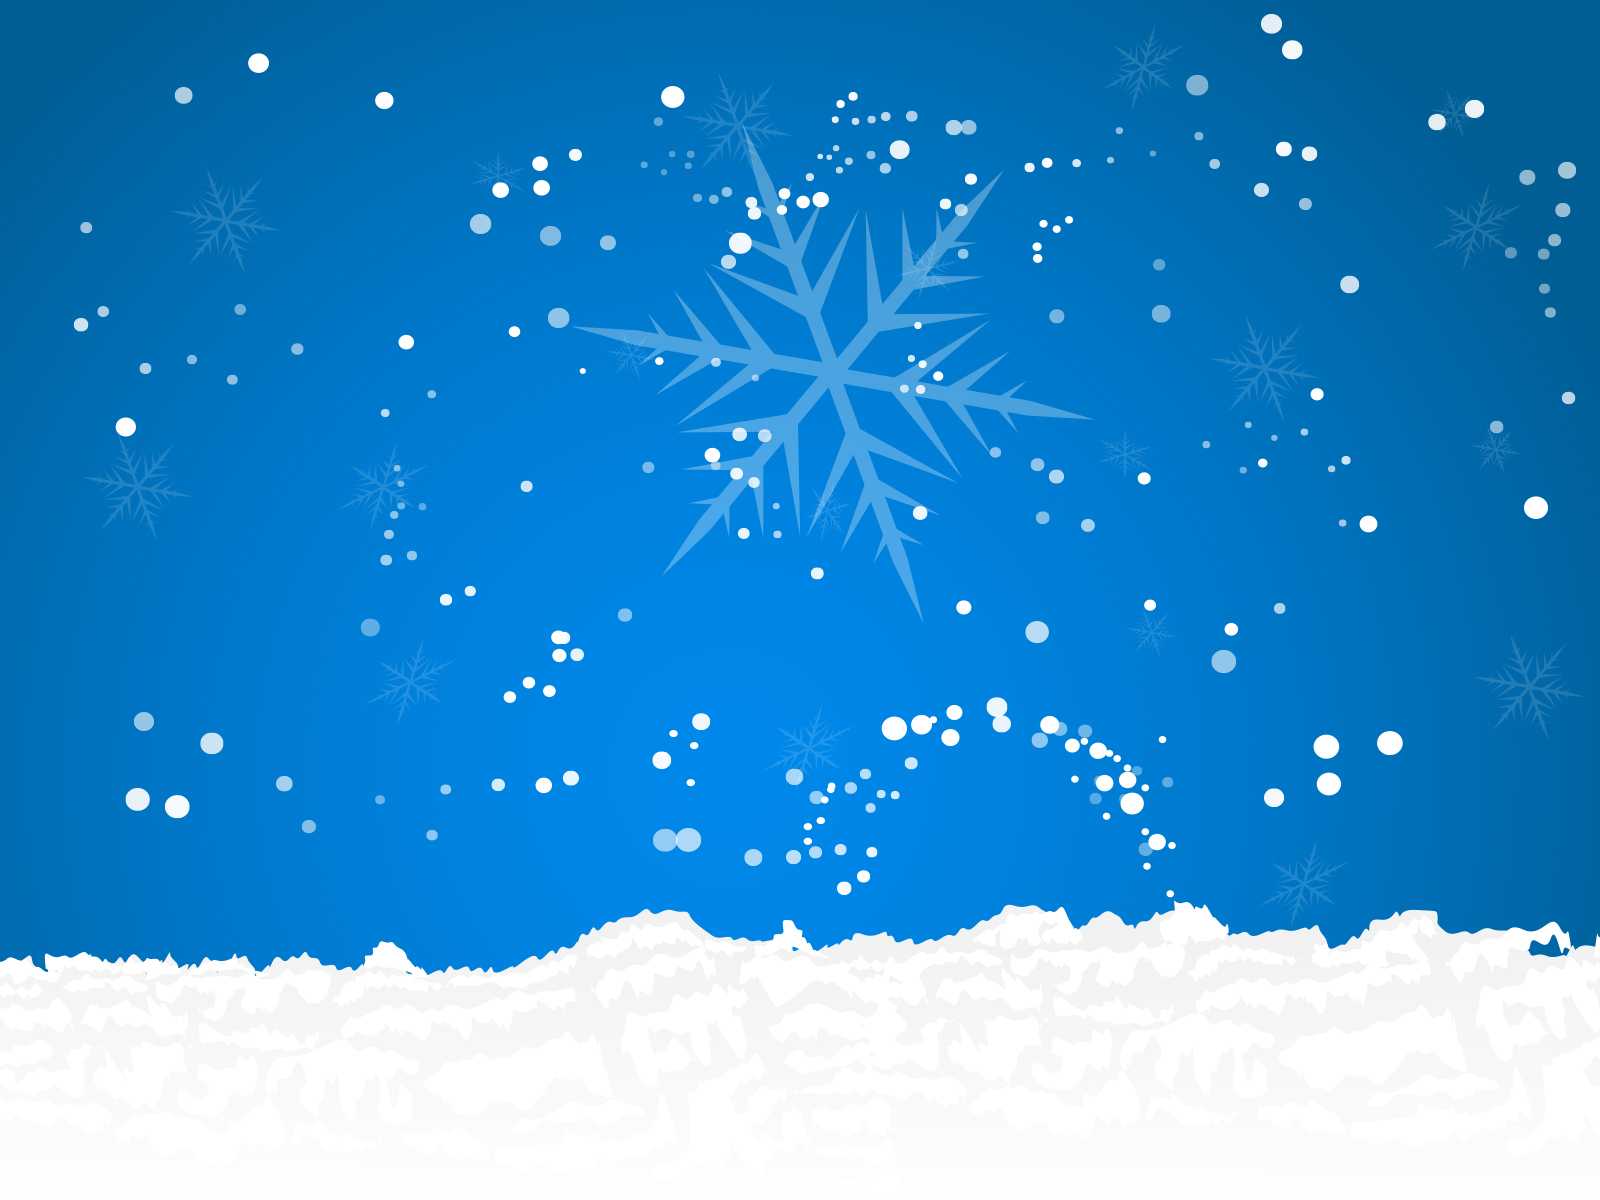 Snow Powerpoint - Free Ppt Backgrounds And Templates Intended For Snow Powerpoint Template